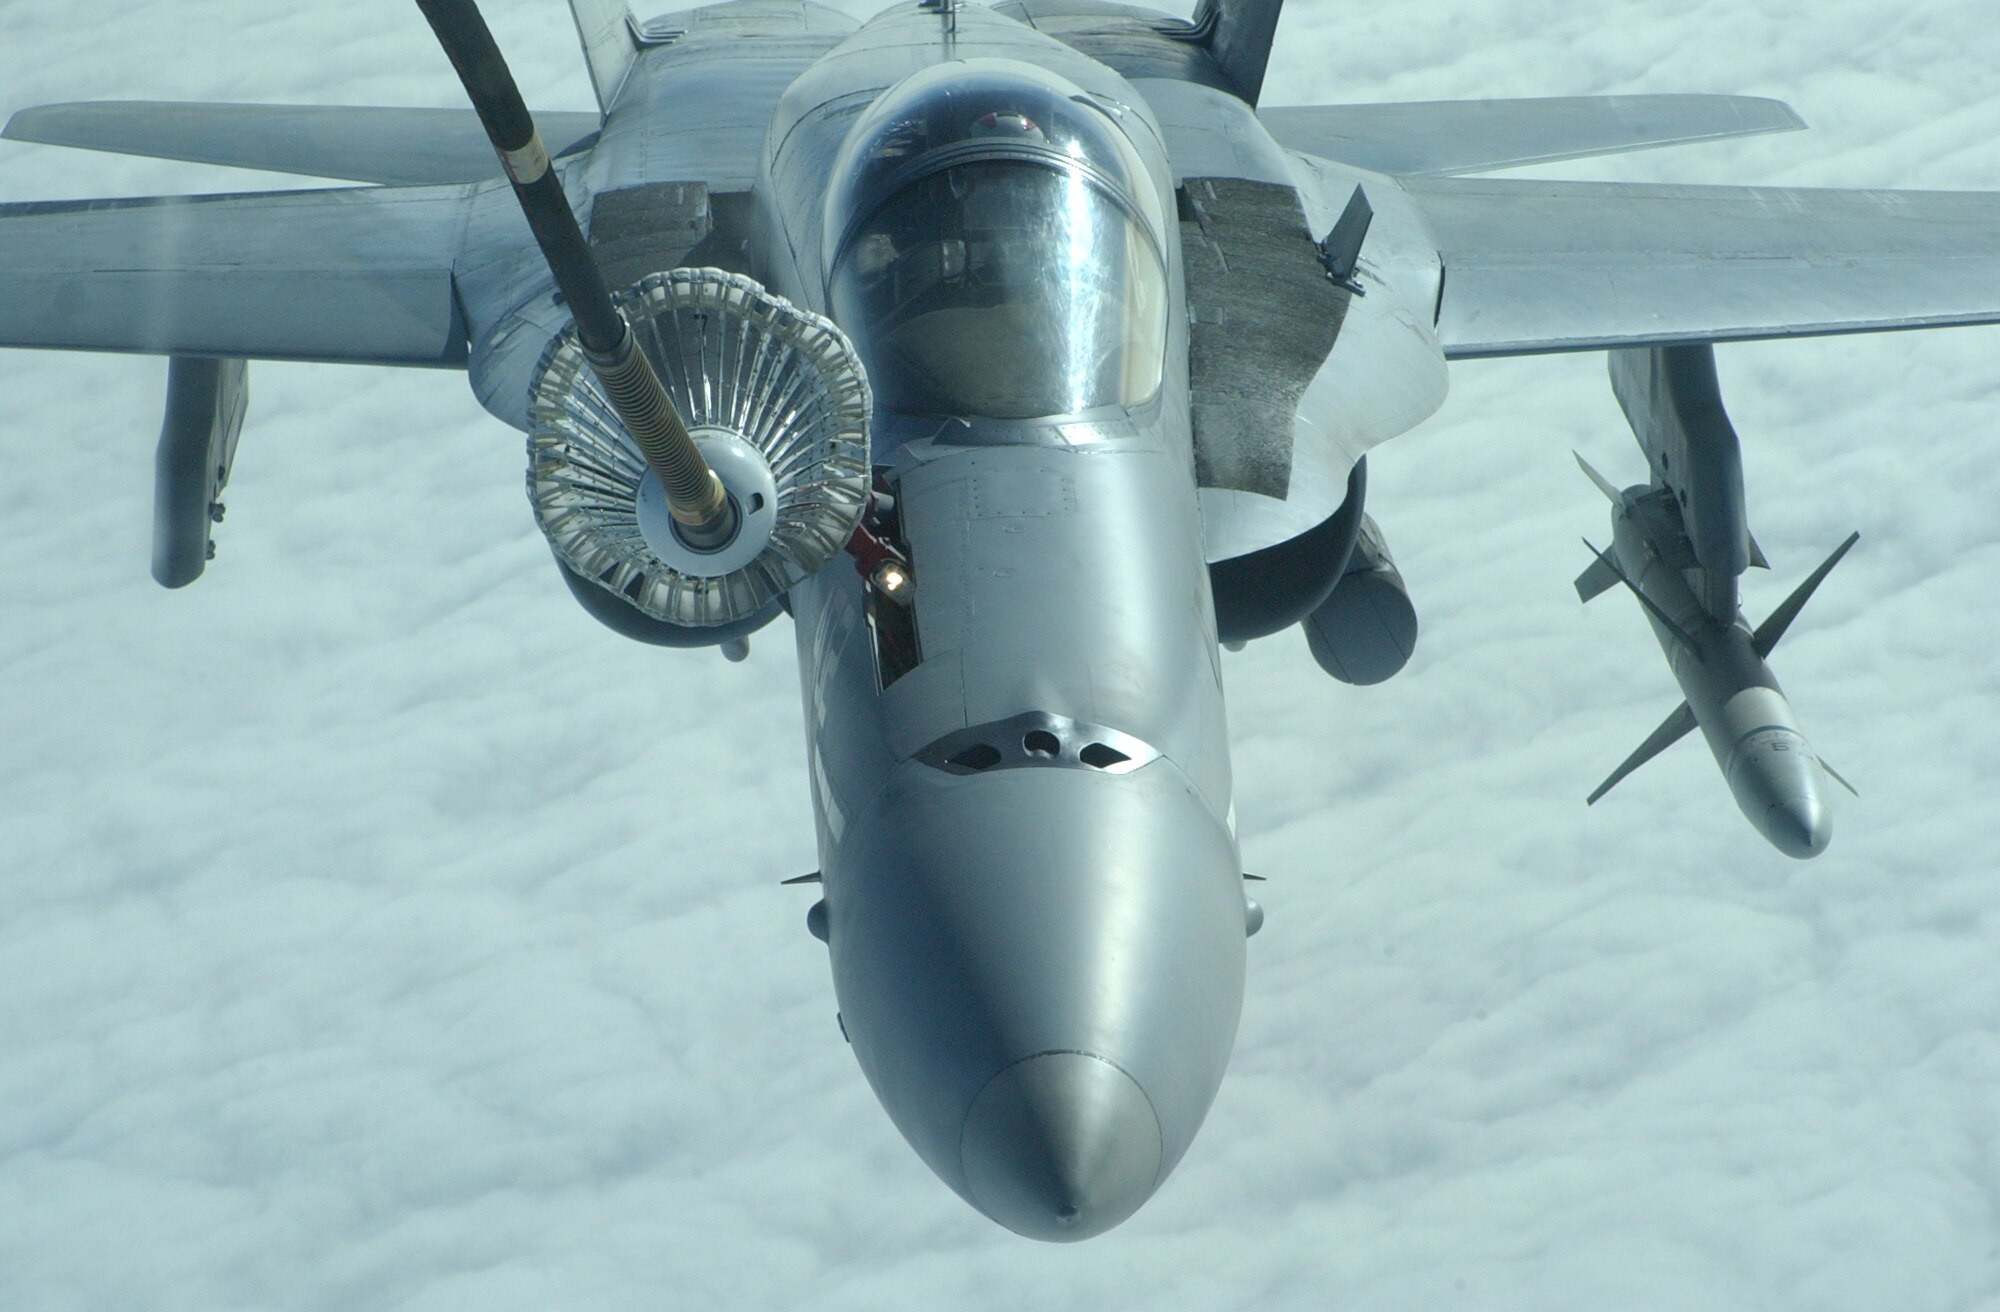 EIELSON AIR FORCE BASE, Alaska--A Navy F-18 Hornet receives fuel from the trailing drogue of a KC-10 Extender during Red Flag-Alaska 07-1 April 11. Red Flag-Alaska is a Pacific Air Forces-directed field training exercise for U.S. forces flown under simulated air combat conditions. It is conducted on the Pacific Alaskan Range Complex with air operations flown out of Eielson and Elmendorf Air Force Bases. (U.S. Air Force photo by Senior Airman Justin Weaver). 
              